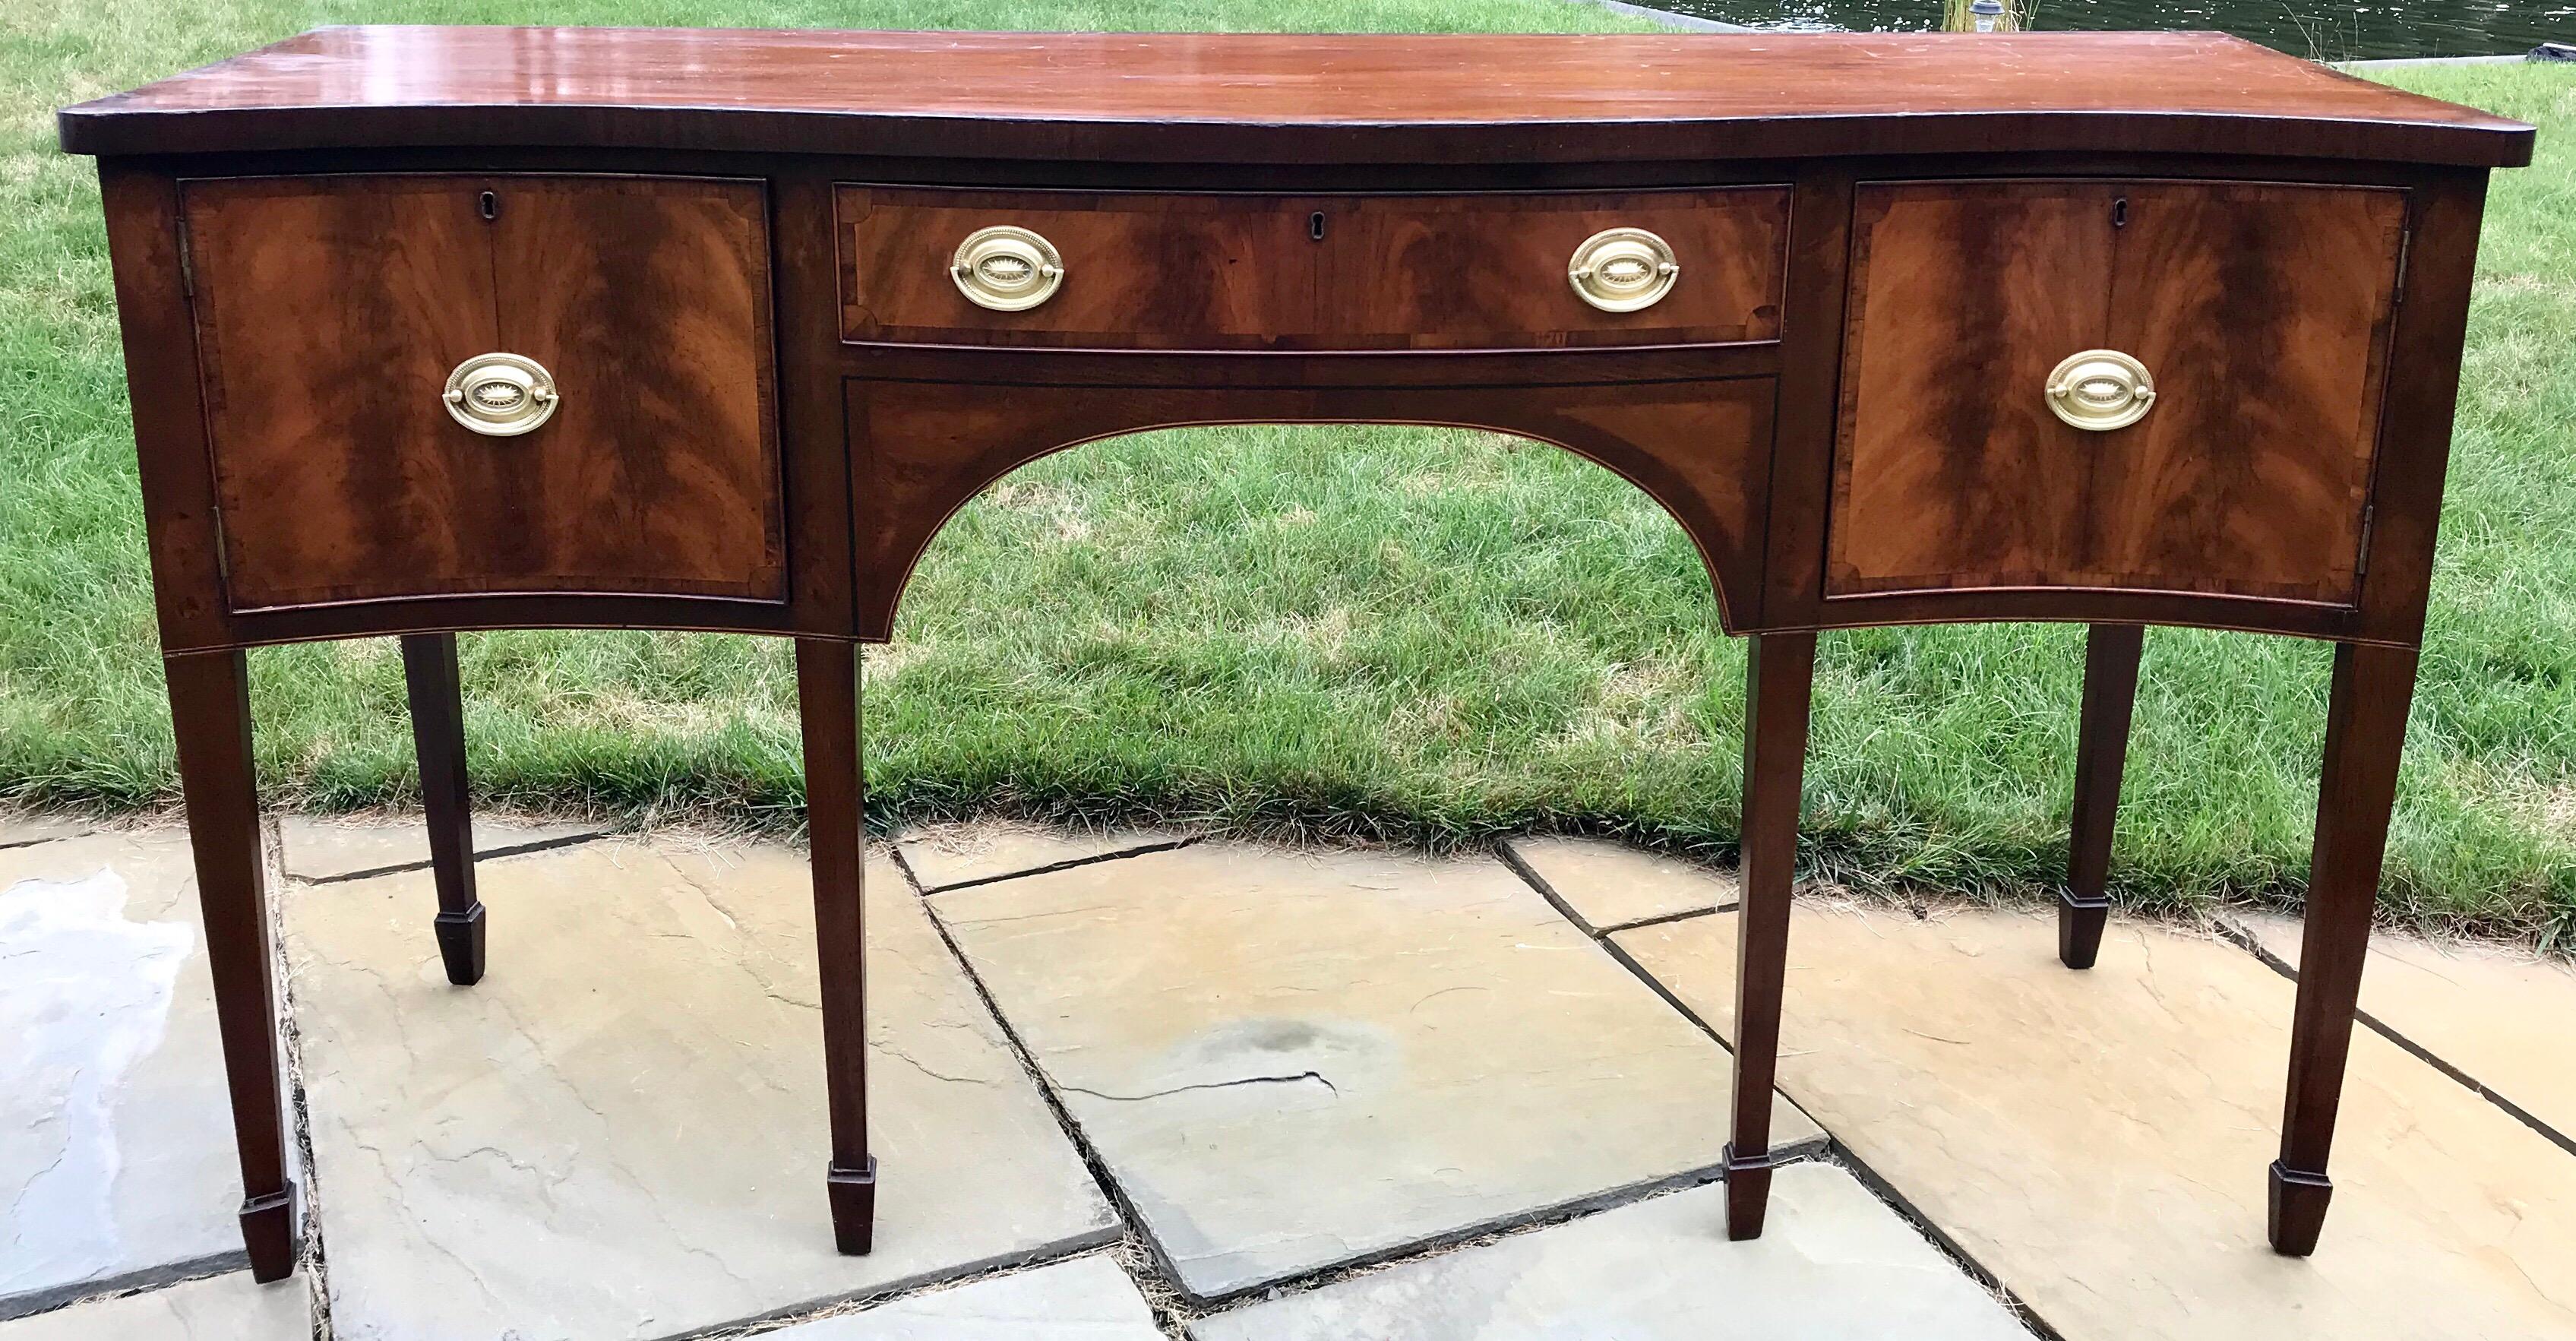 George III period English serpentine front sideboard with beautifully bookmatched crotch grain Mahogany veneered front doors and drawer. The tapered legs have spade feet which is typical for Hepplewhite's design.